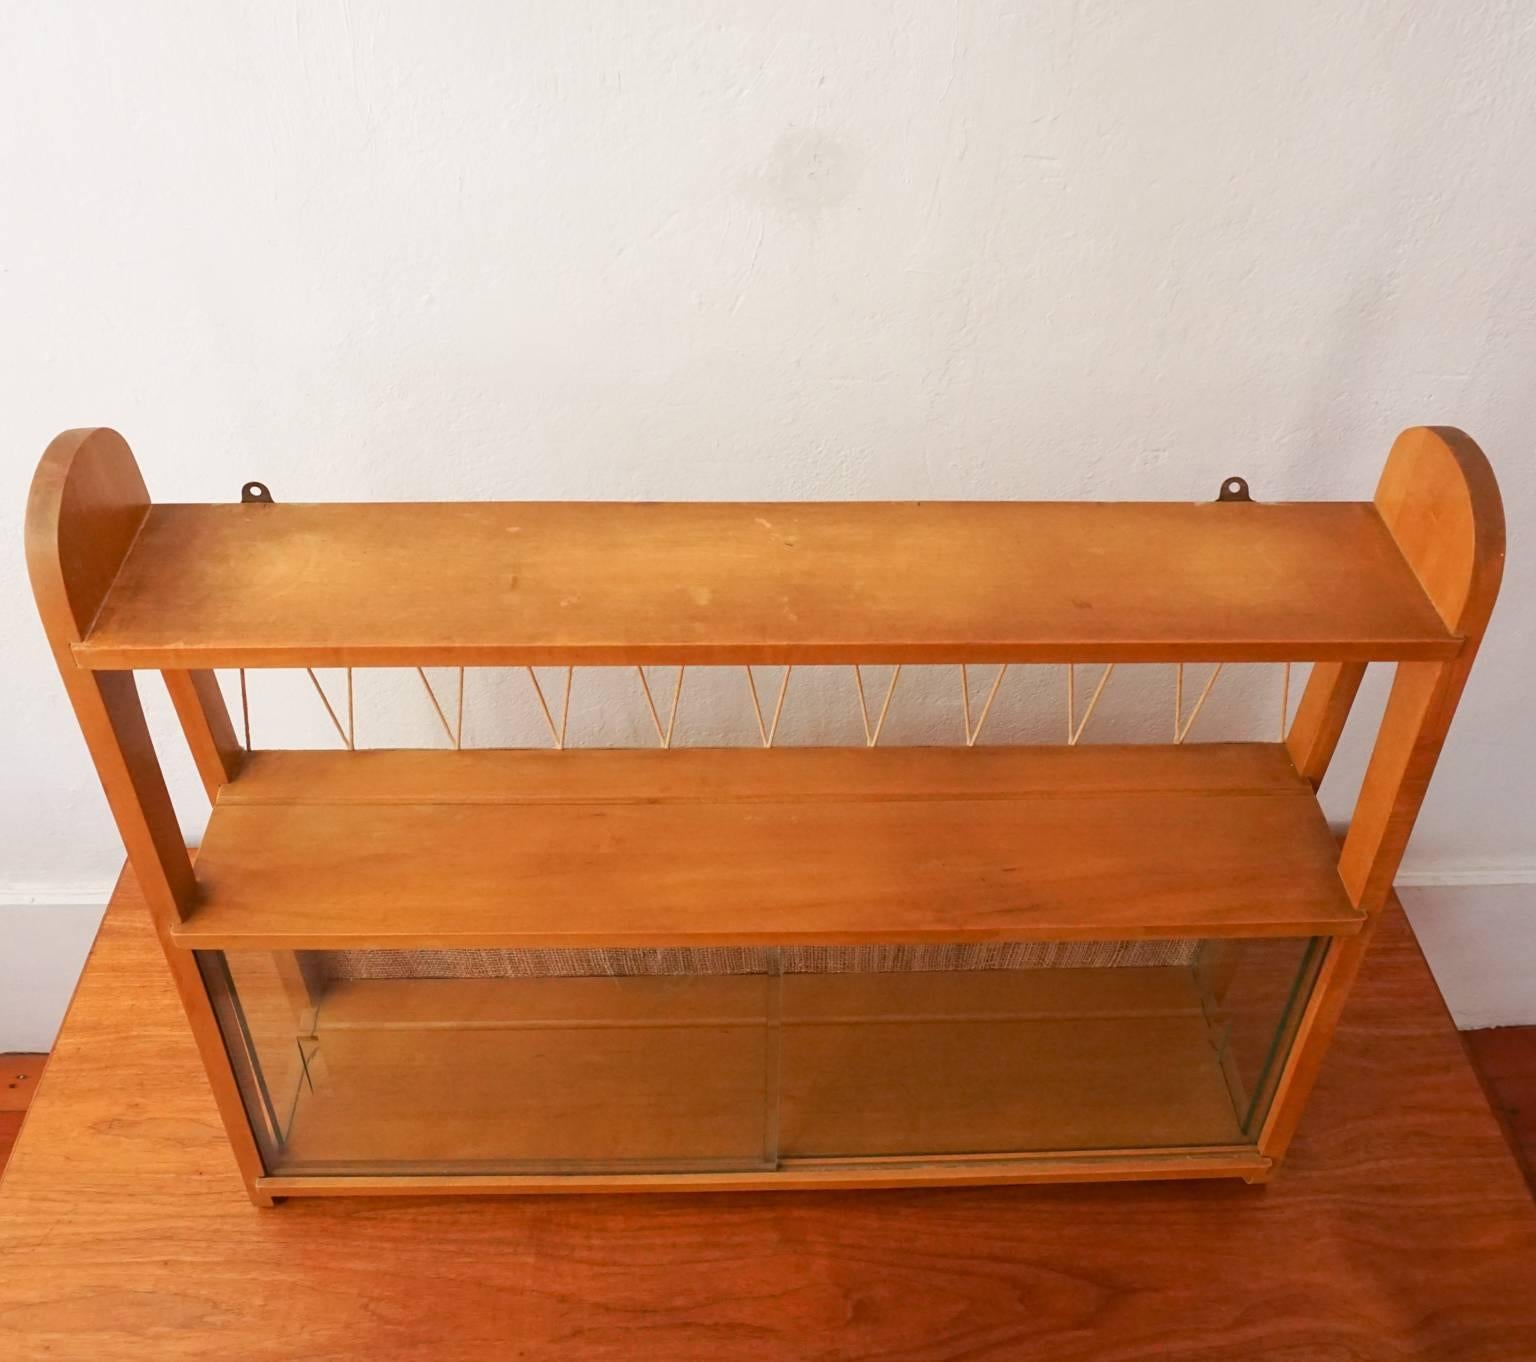 1950s Wall Shelves with String and Display Case 2